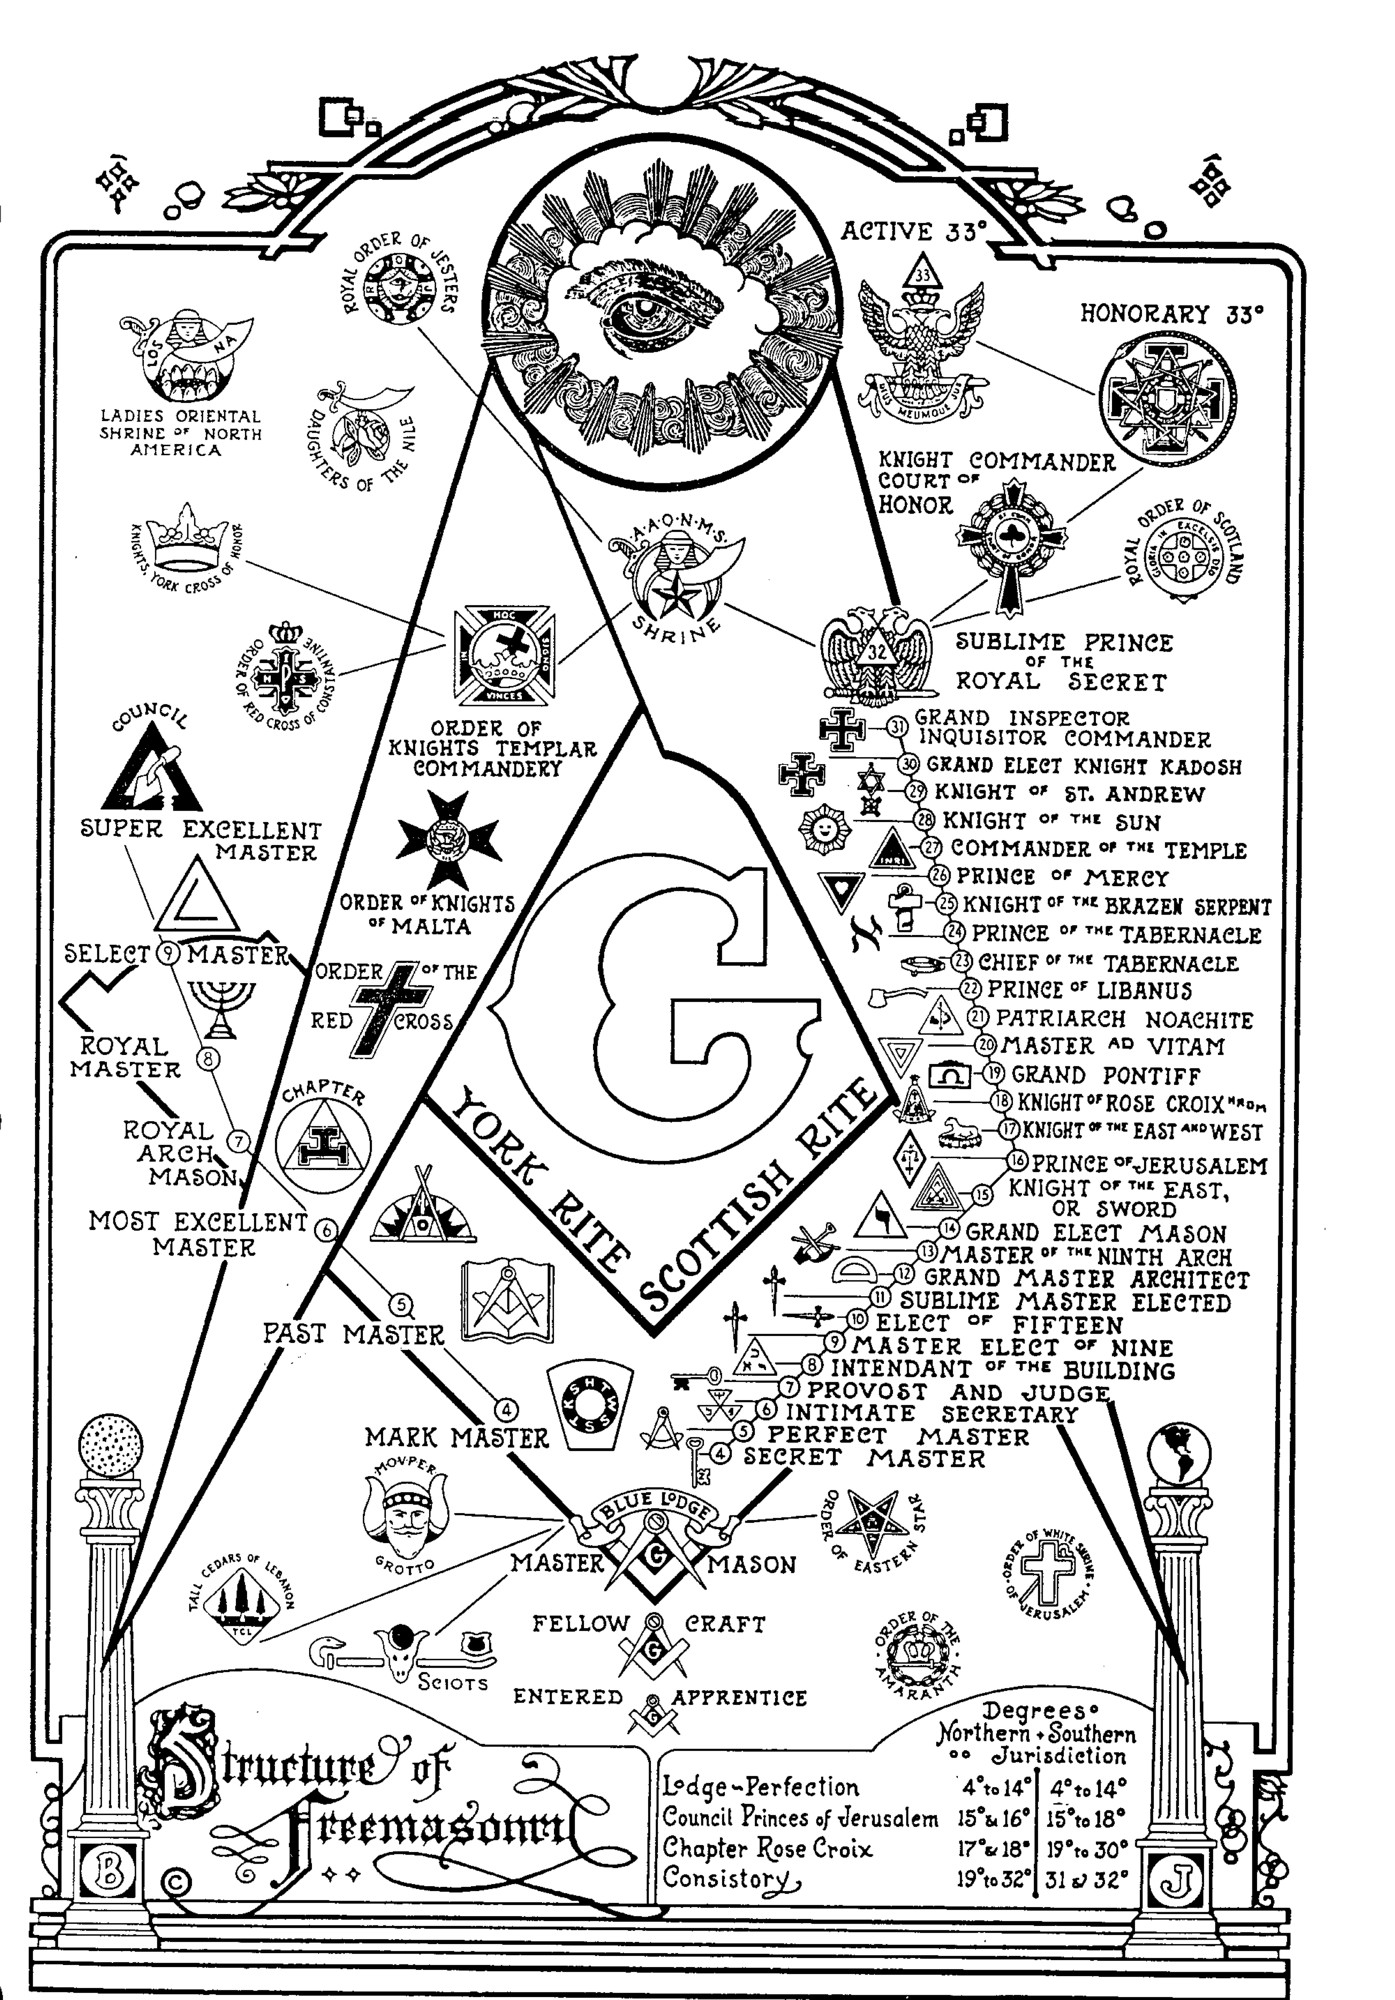 Diagram of the Structure of Freemasonry